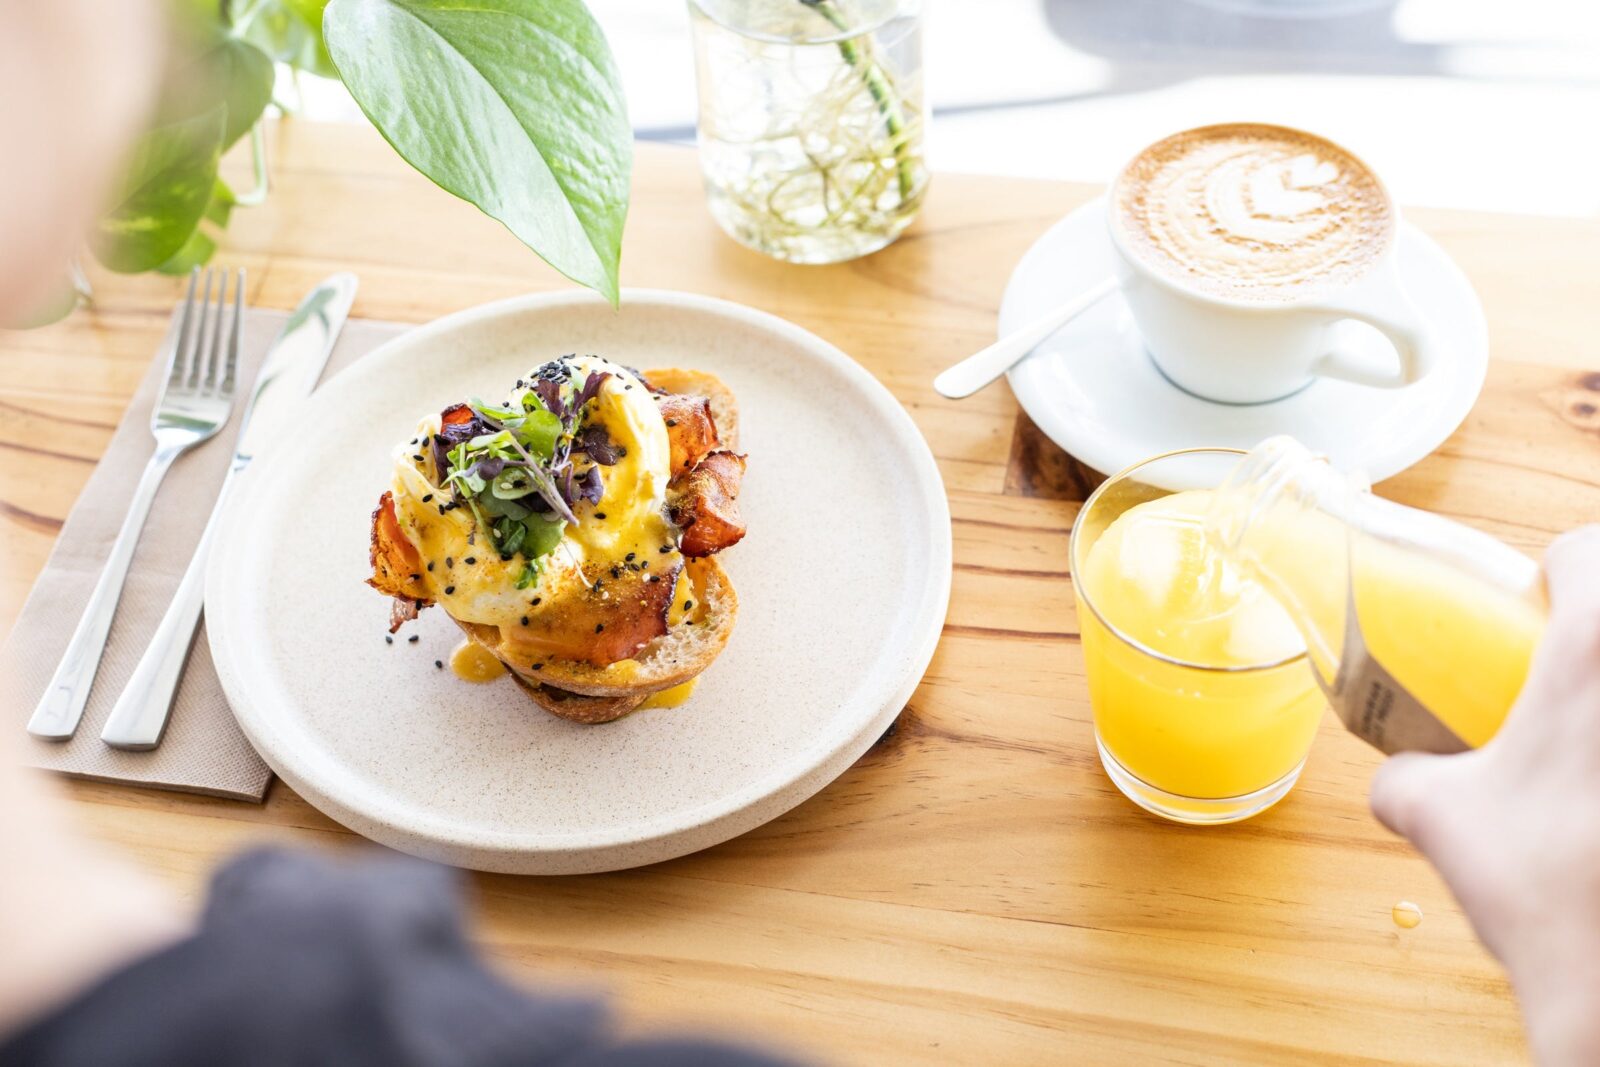 An eggs benedict served on a cream plate with a flat white and a glass of cold-pressed orange juice